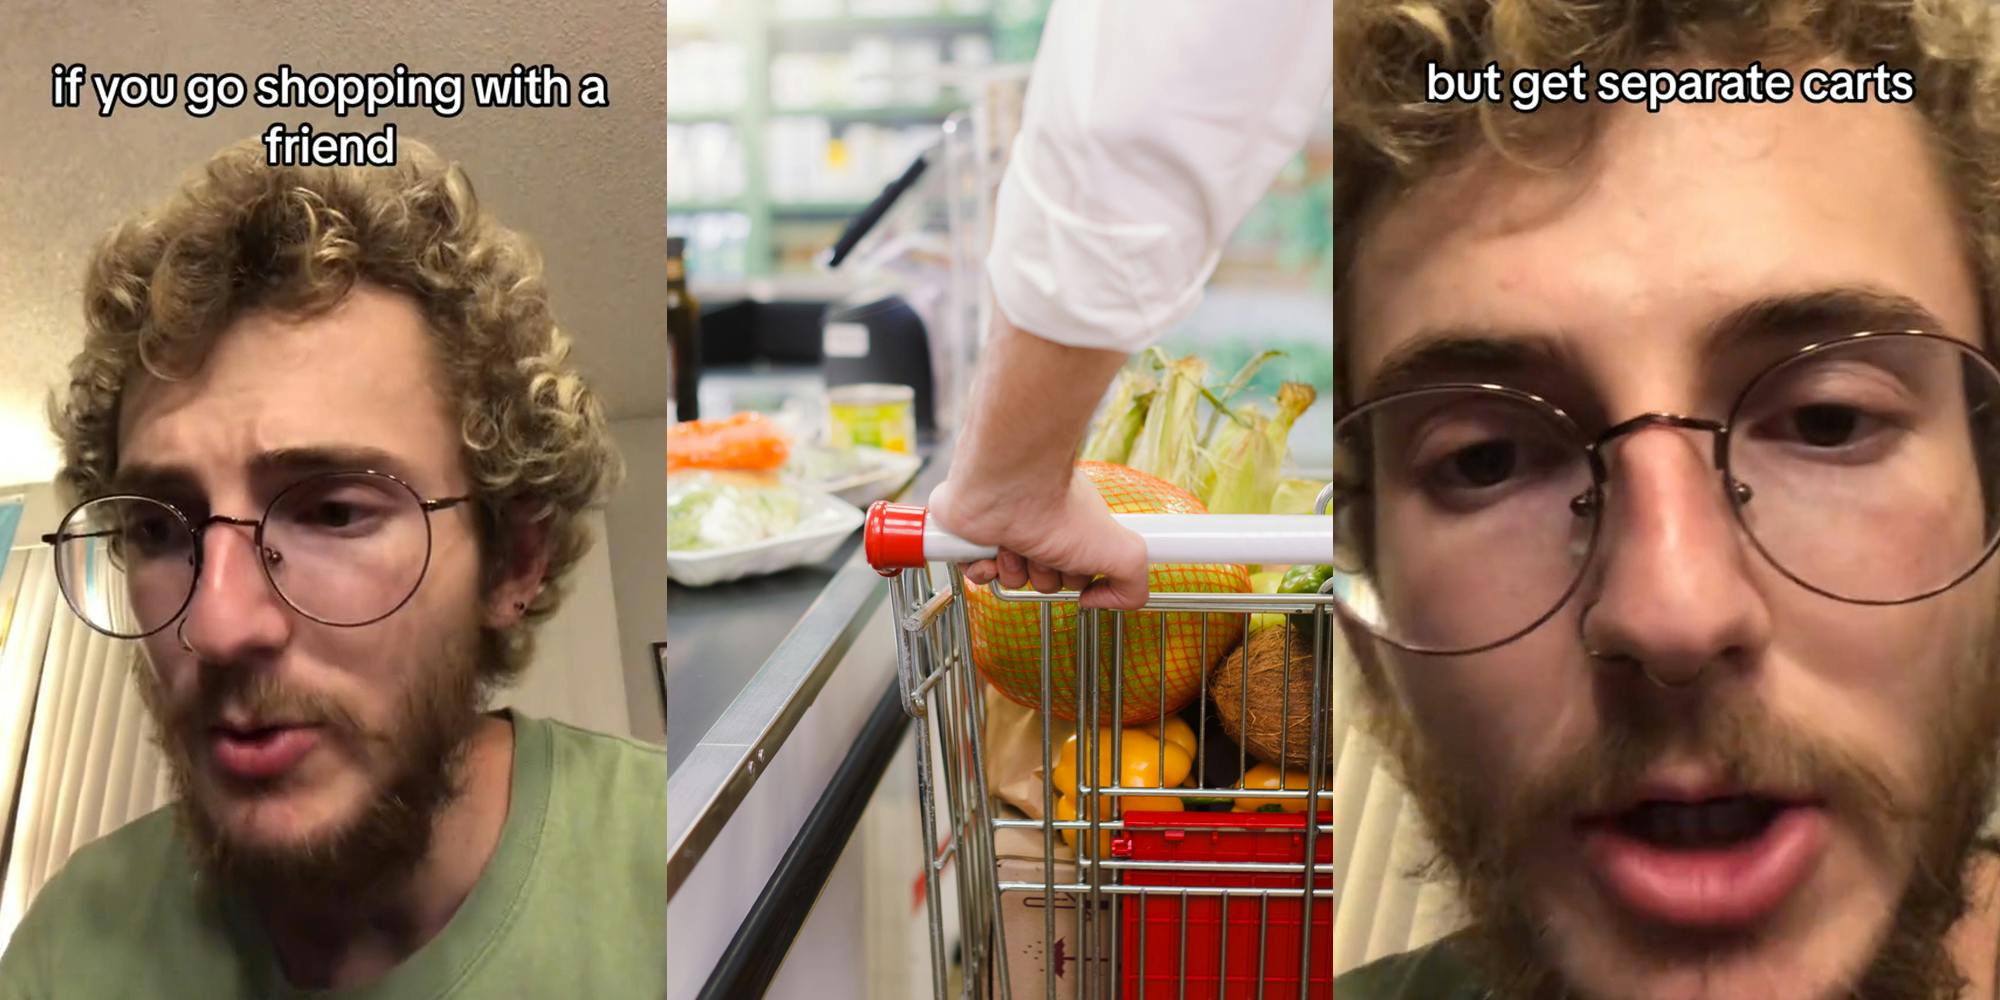 grocery store worker with caption "if you go shopping with friend" (l) grocery shopper at register (c) grocery store worker with caption "but get separate carts" (r)